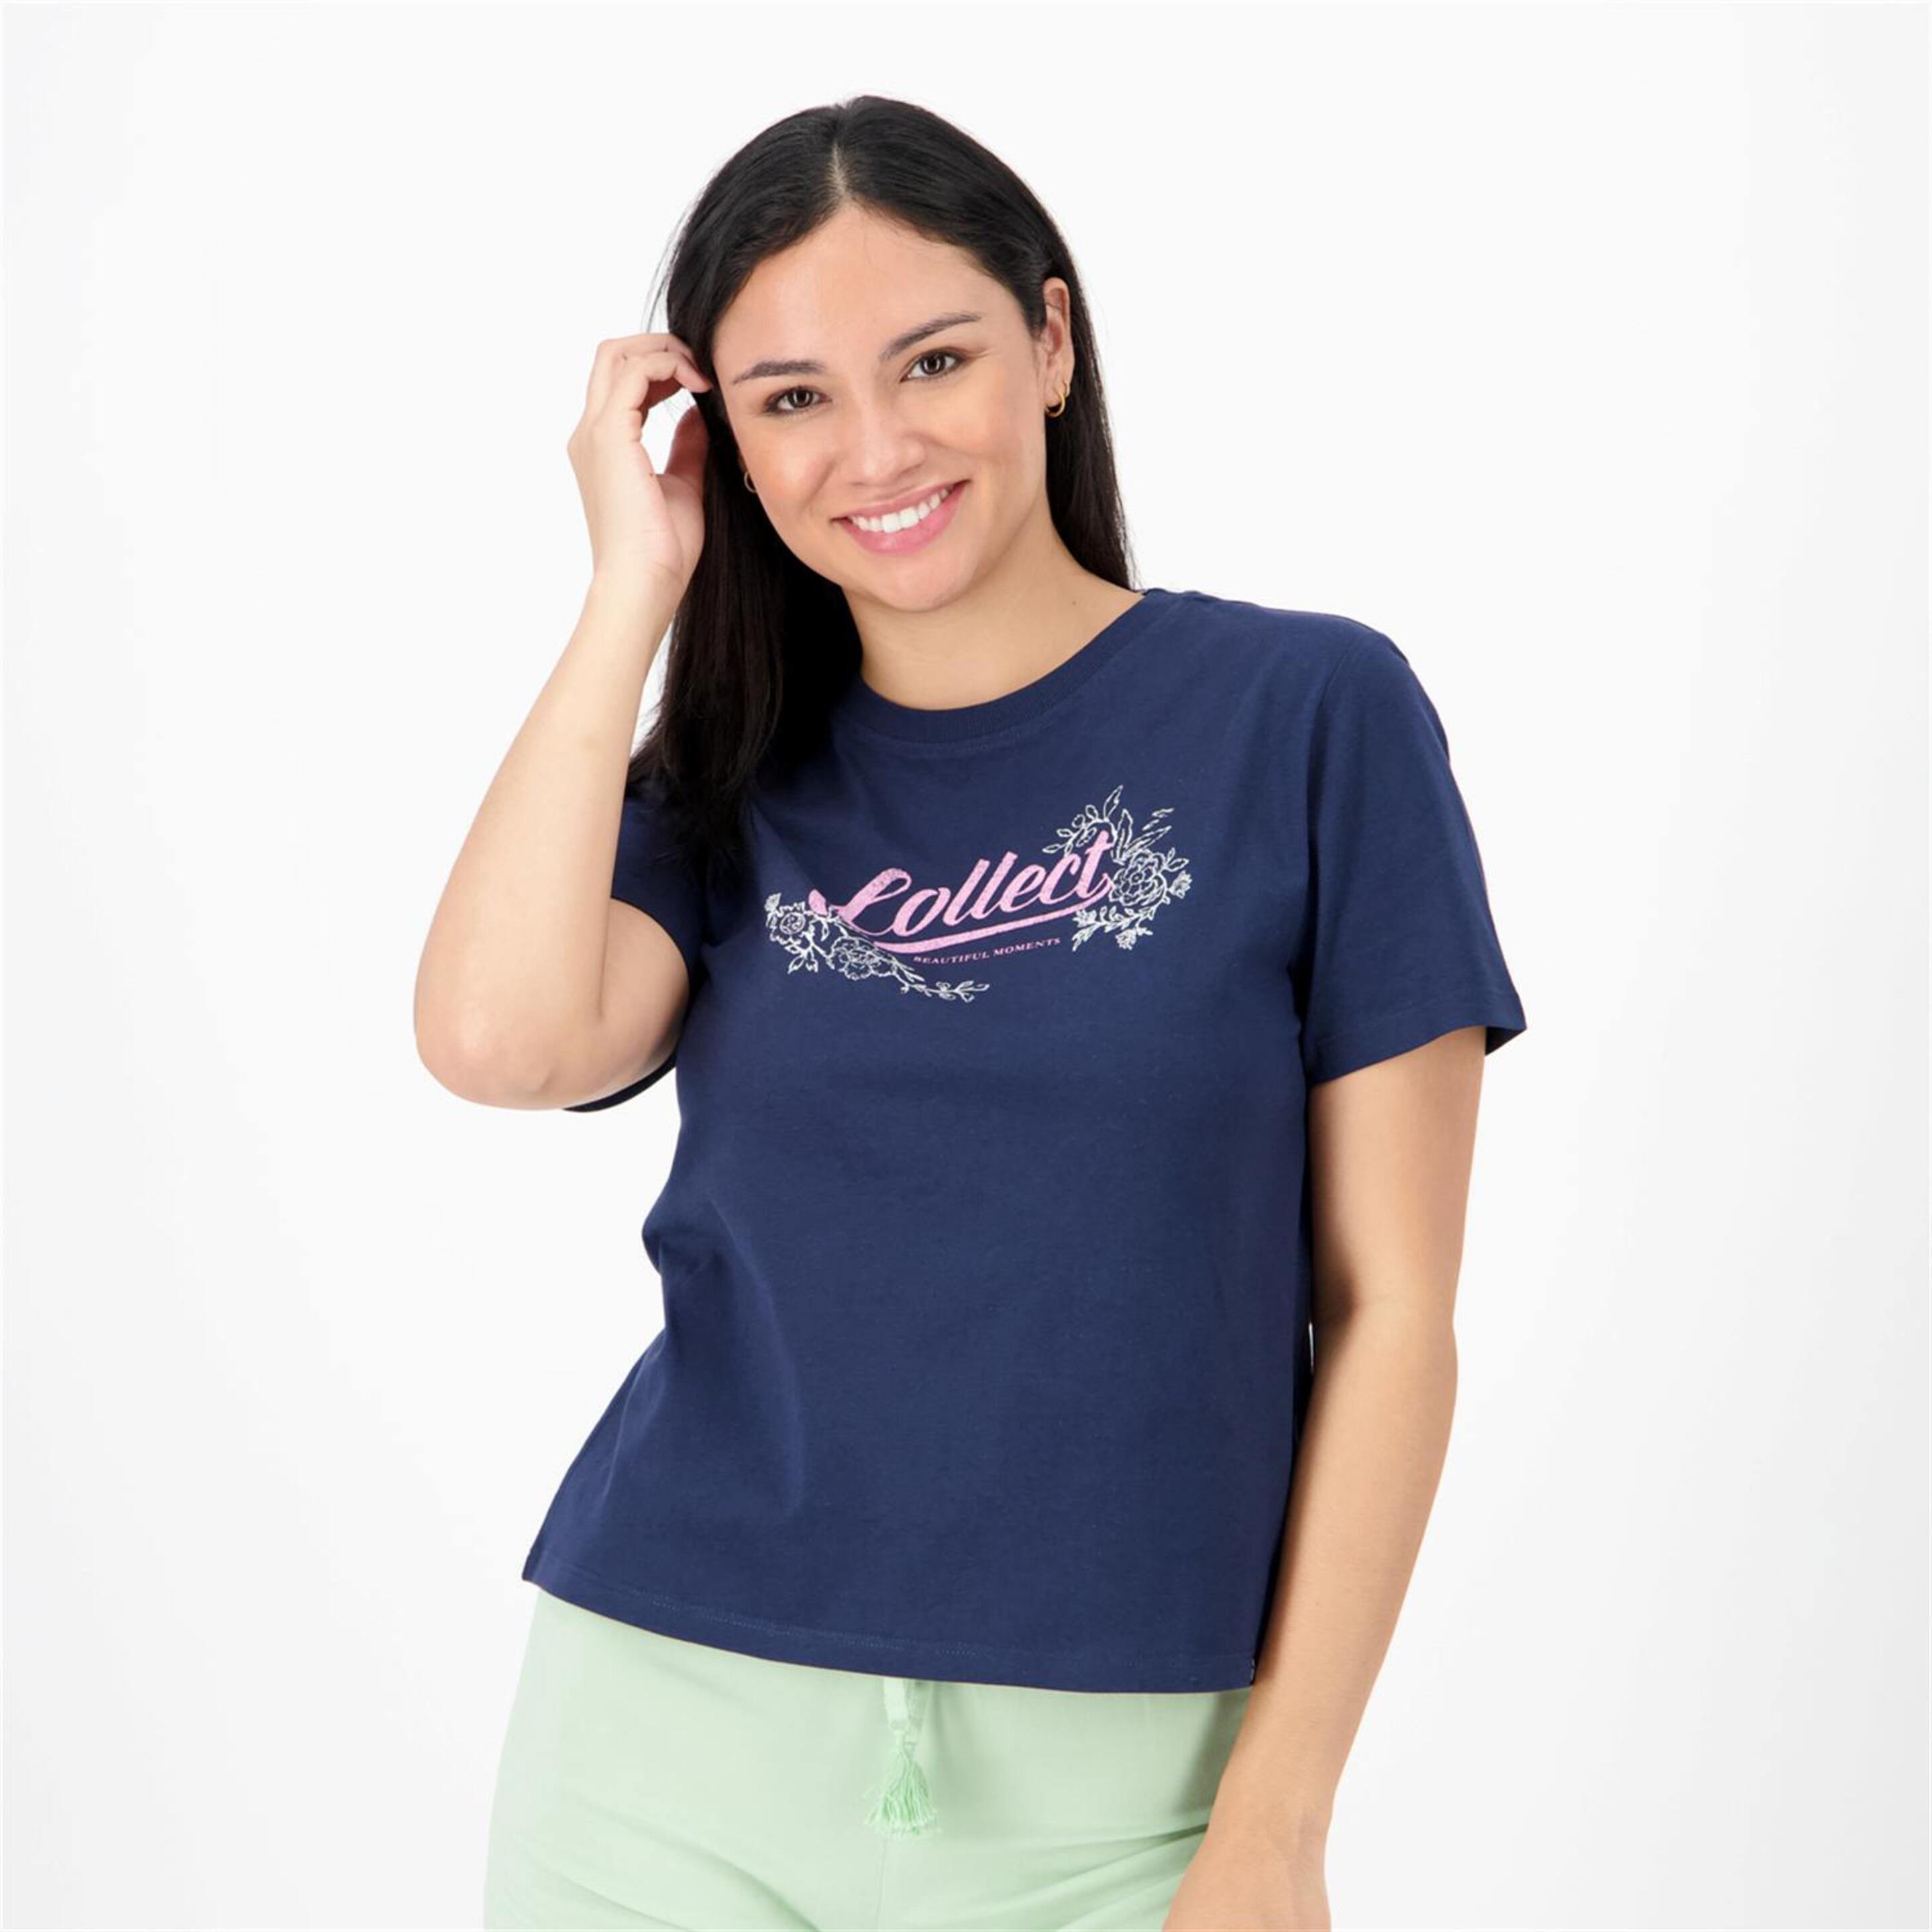 Up Stamps - azul - T-shirt Mulher